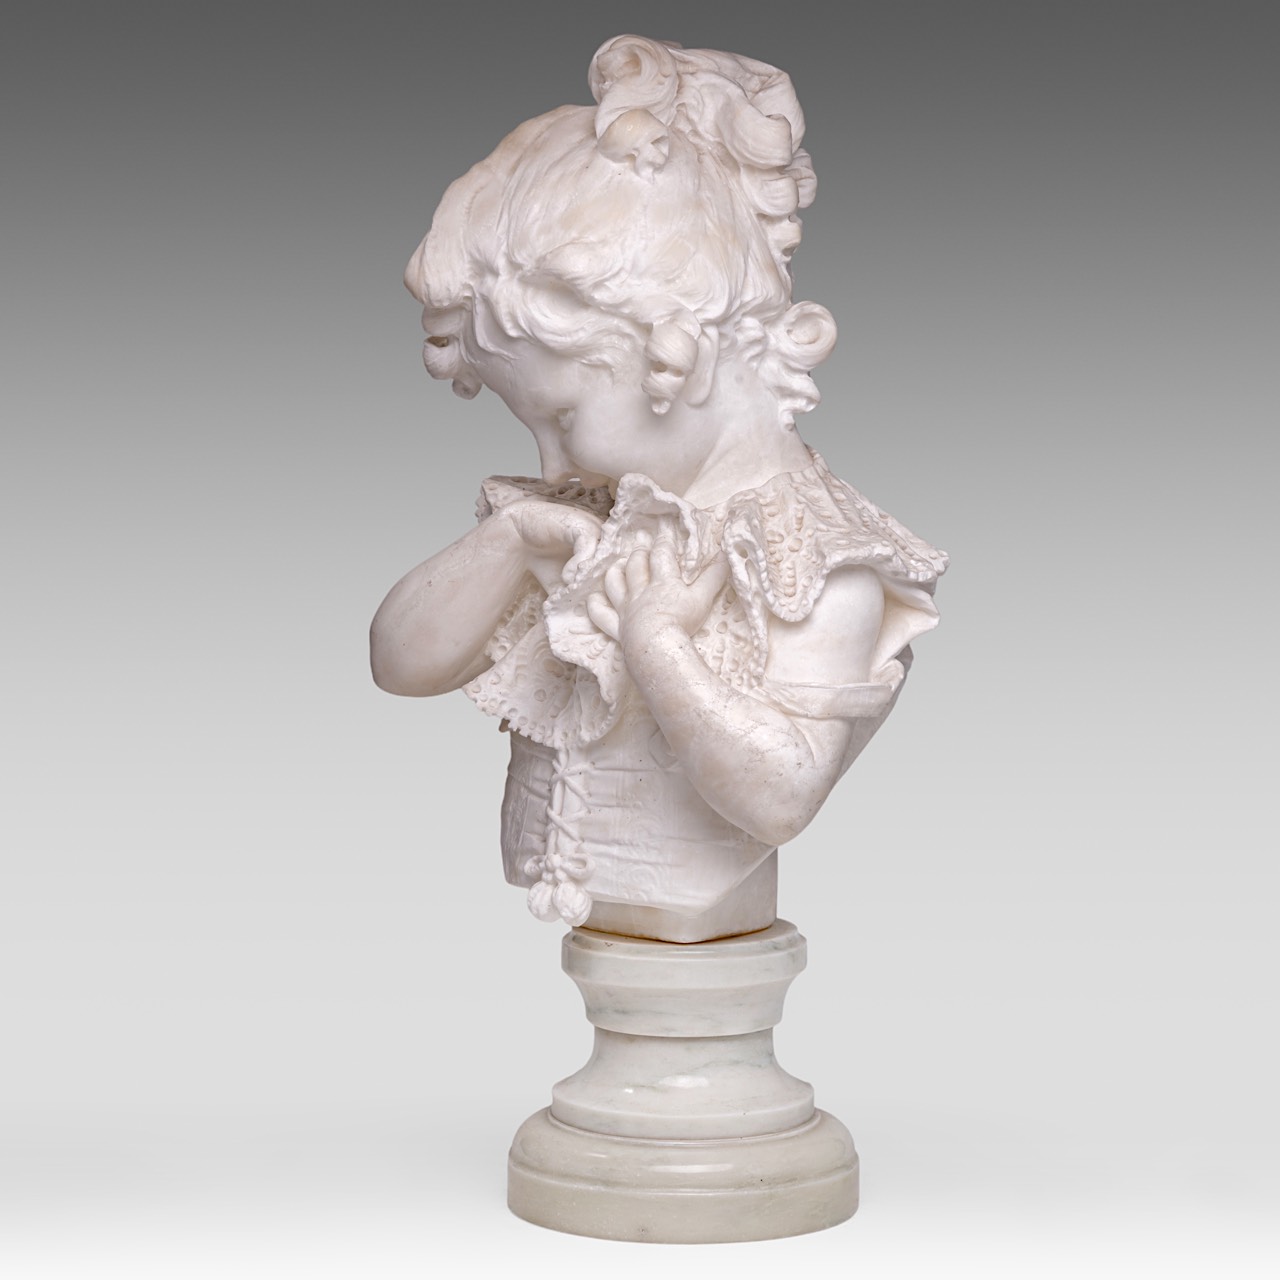 Studio of Pietro Bazzanti (1825-1895), the Carrara marble bust of a girl with a lacework collar, H 6 - Image 2 of 7